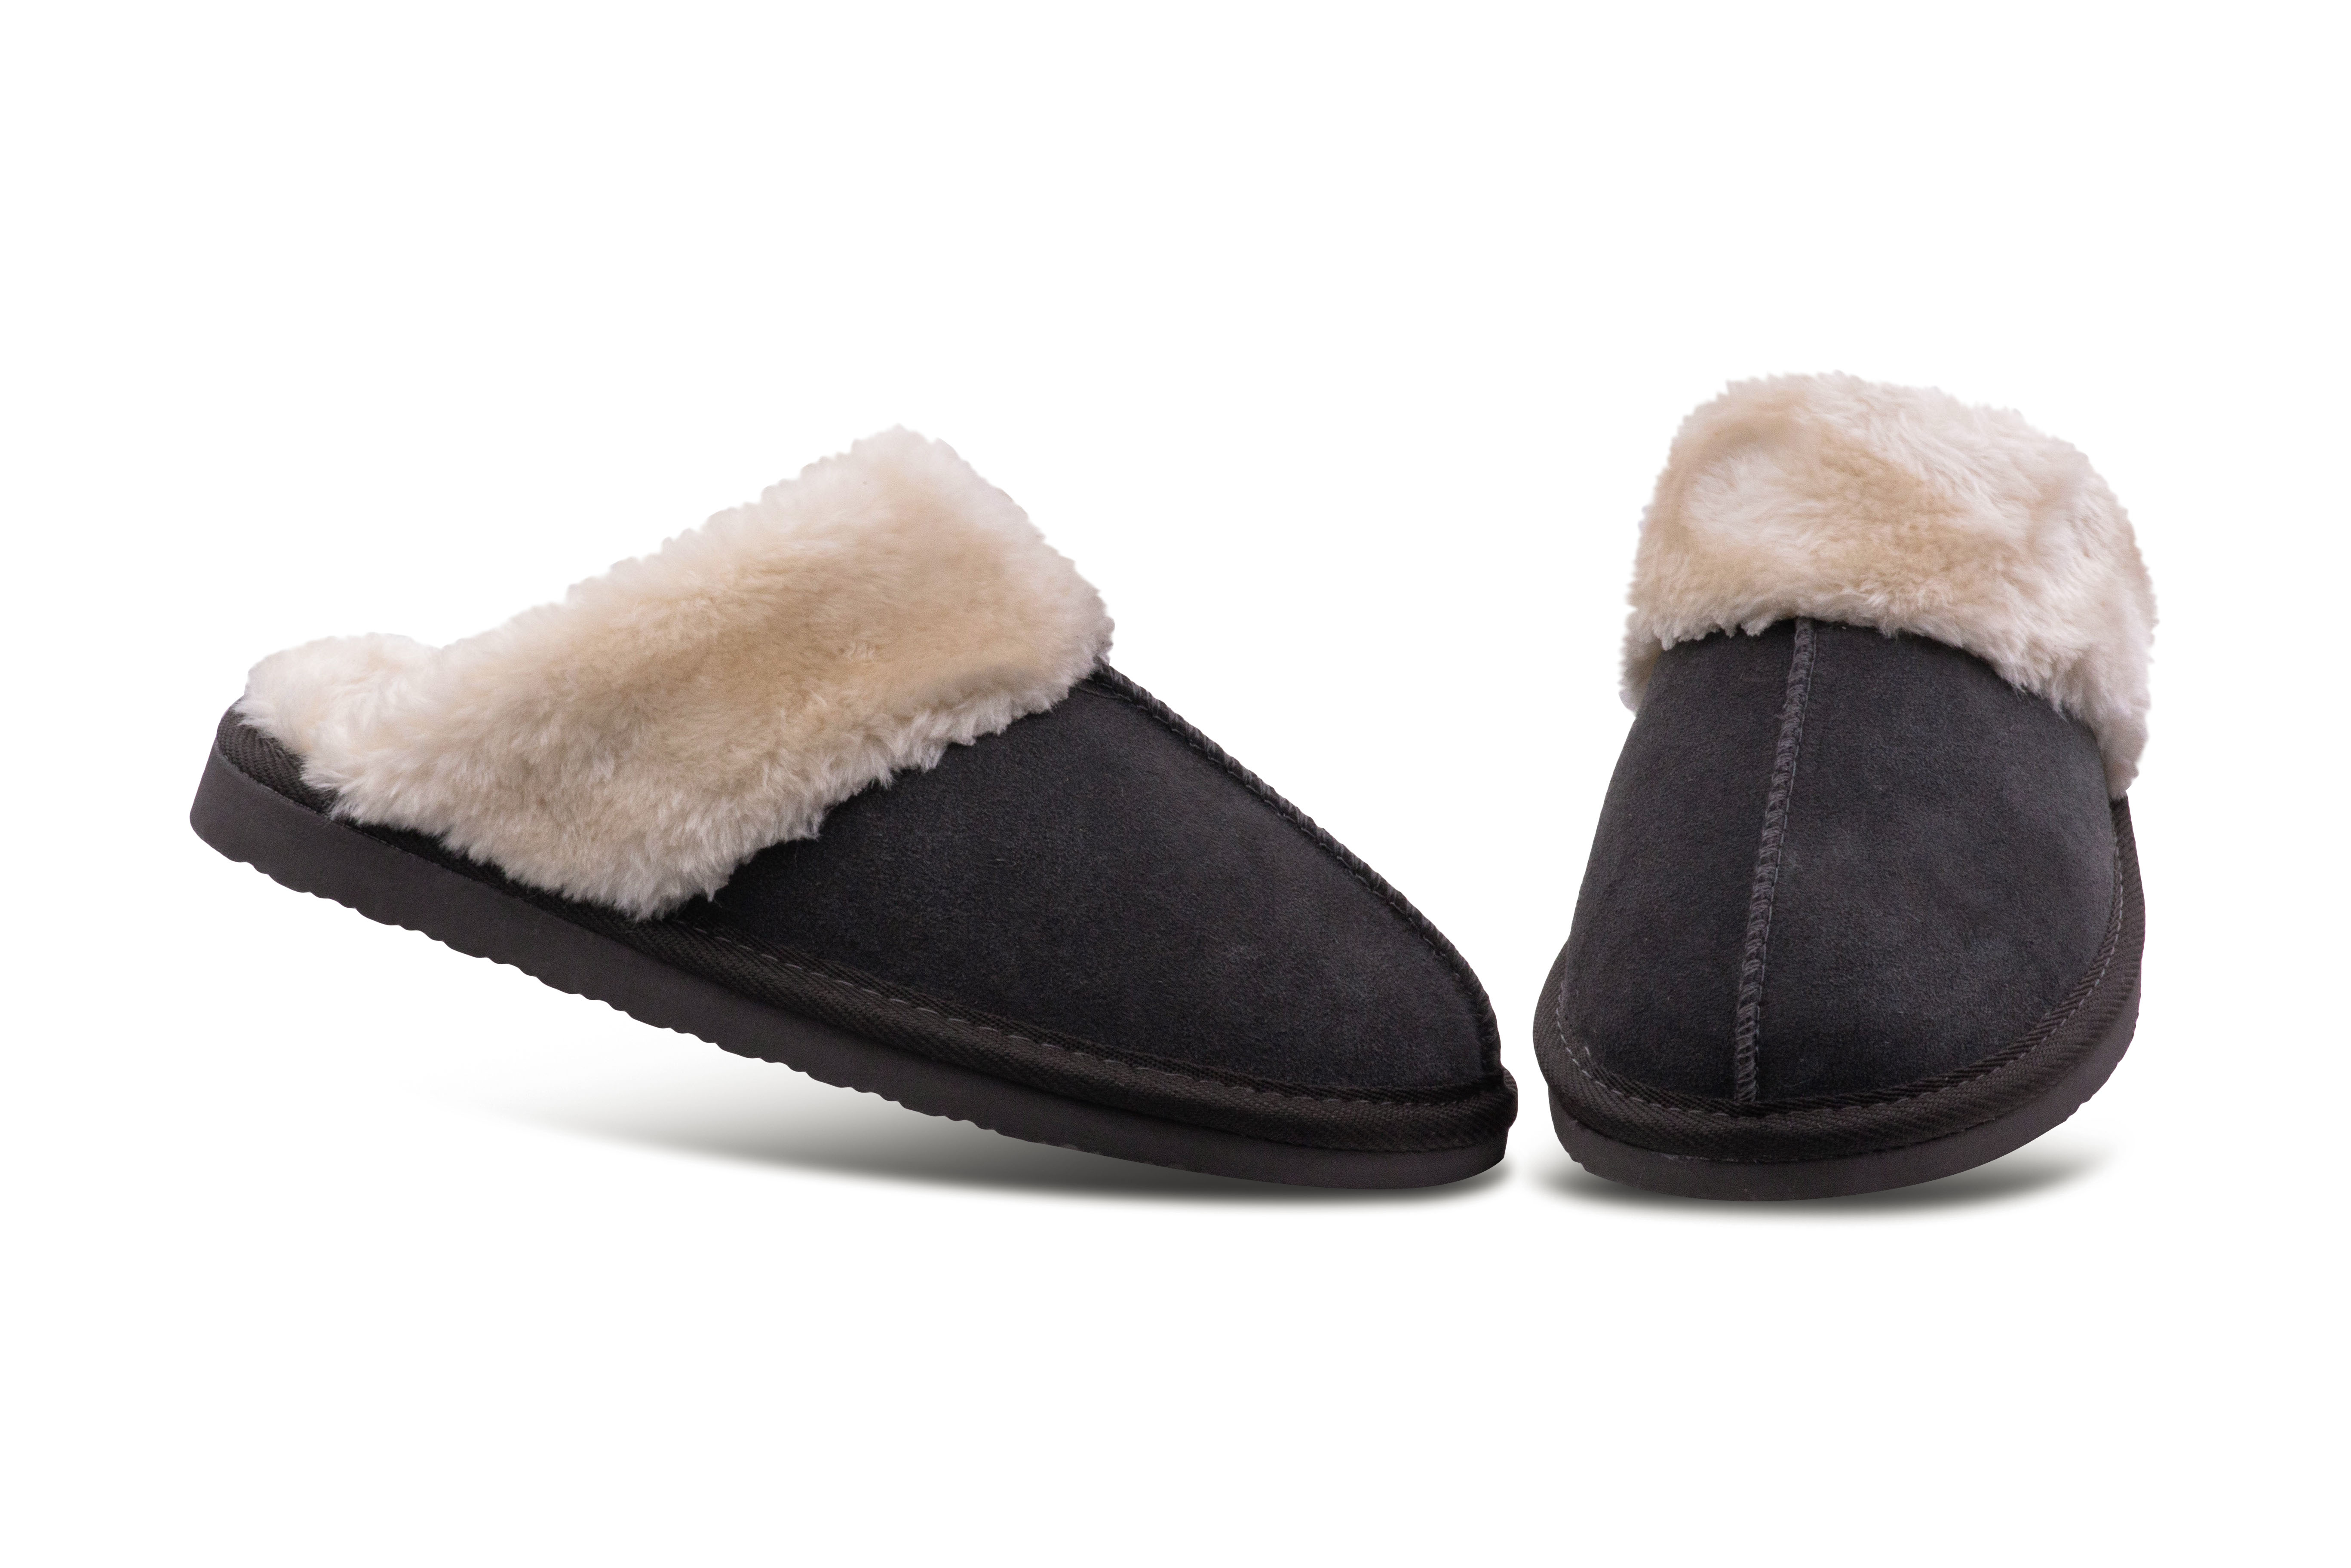 Minnetonka Womens Chesney Fur Lined Slippers - Charcoal - Size 6